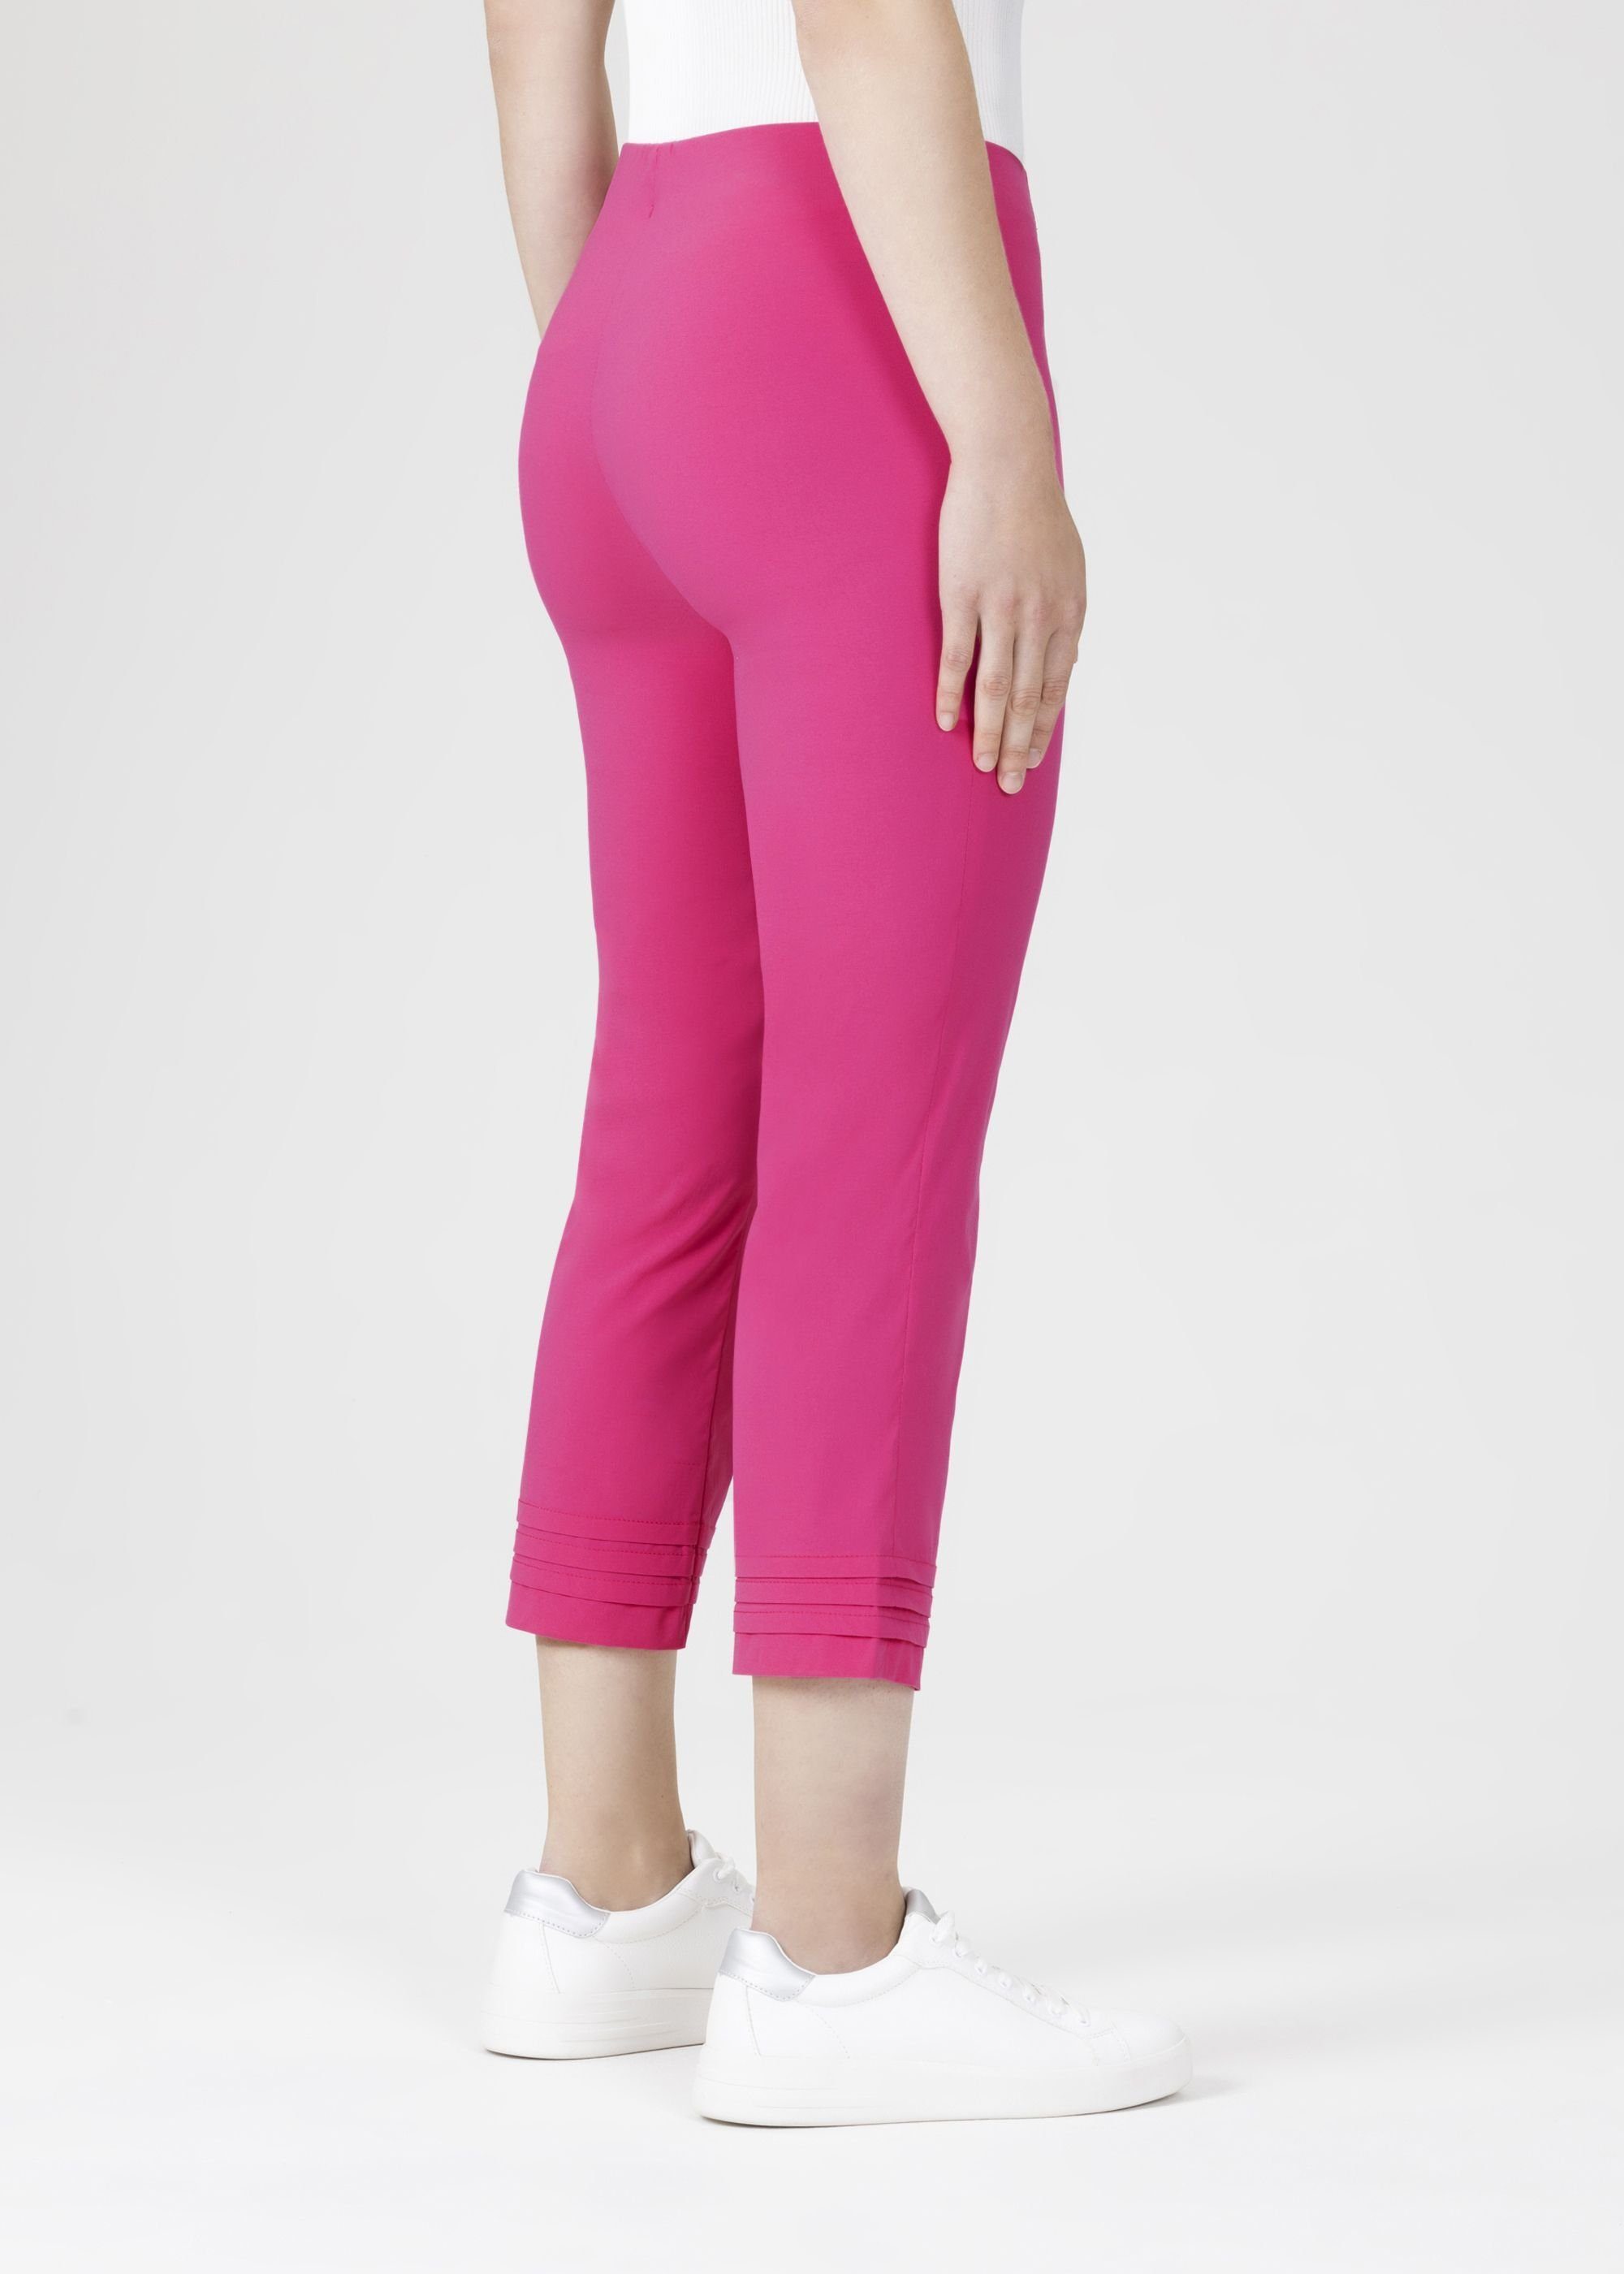 fuxia Faltendetails Stoffhose Stehmann mit Ina fluo